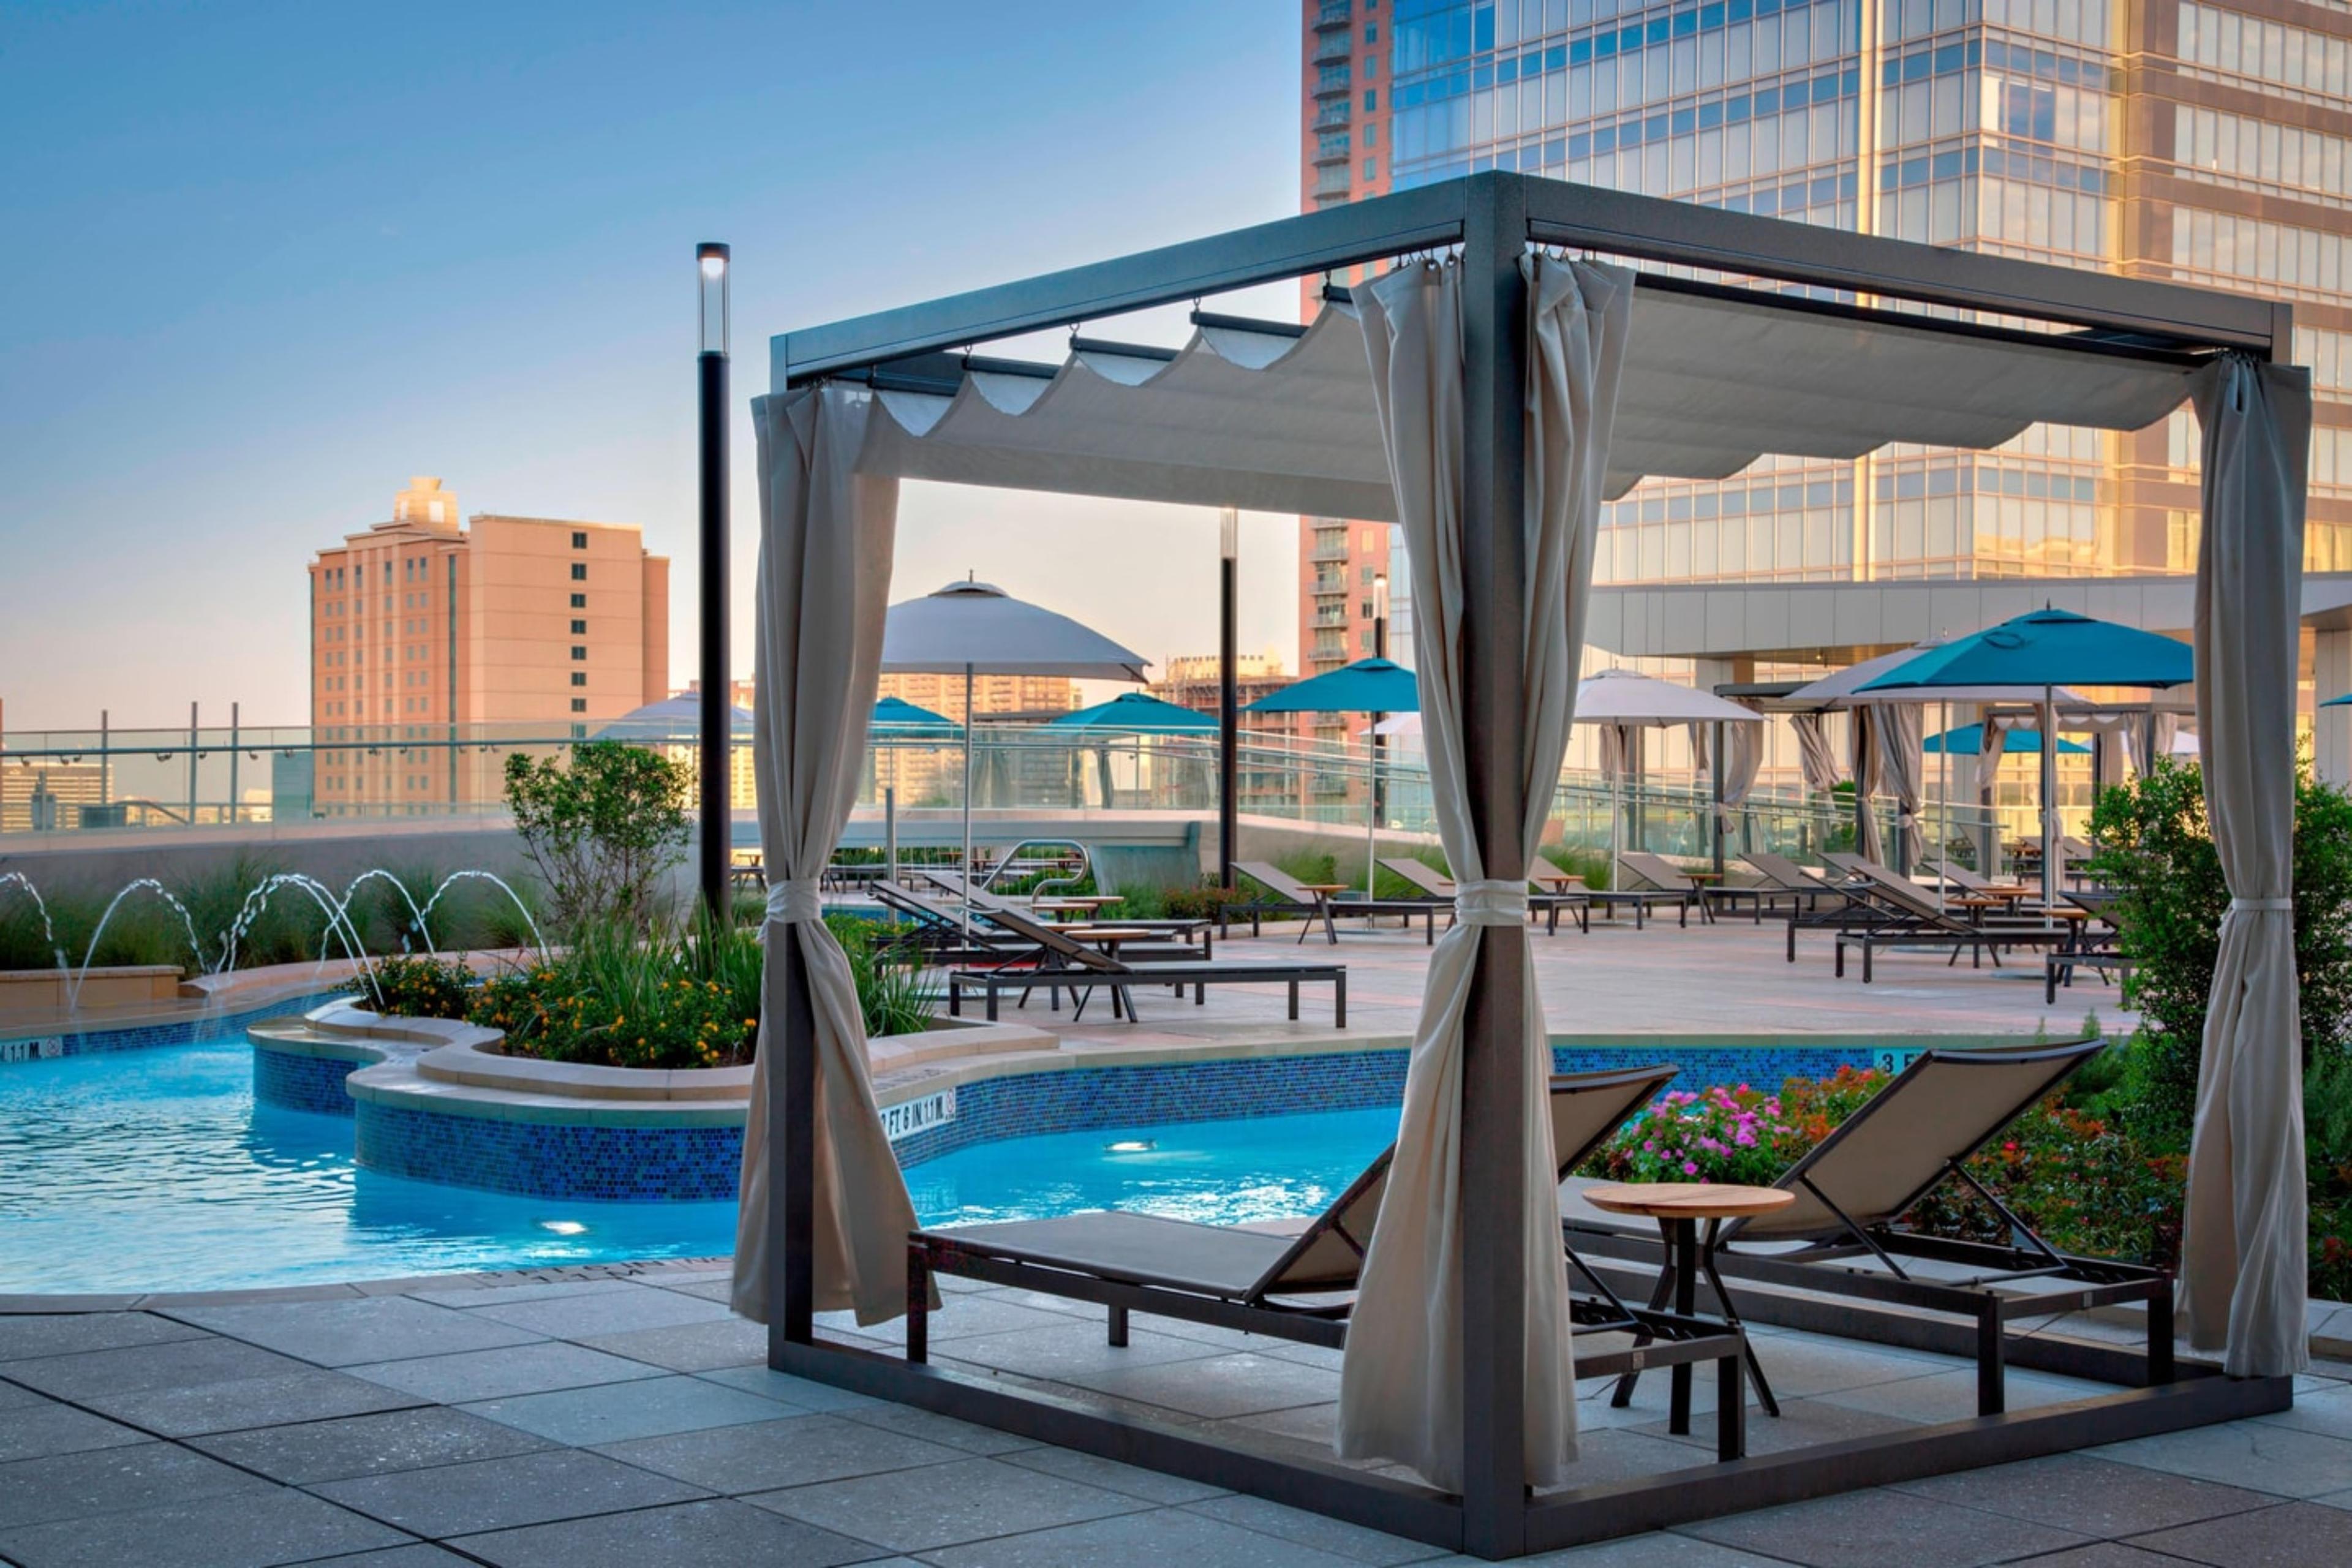 Altitude Rooftop & Pool at Marriott Marquis Houston